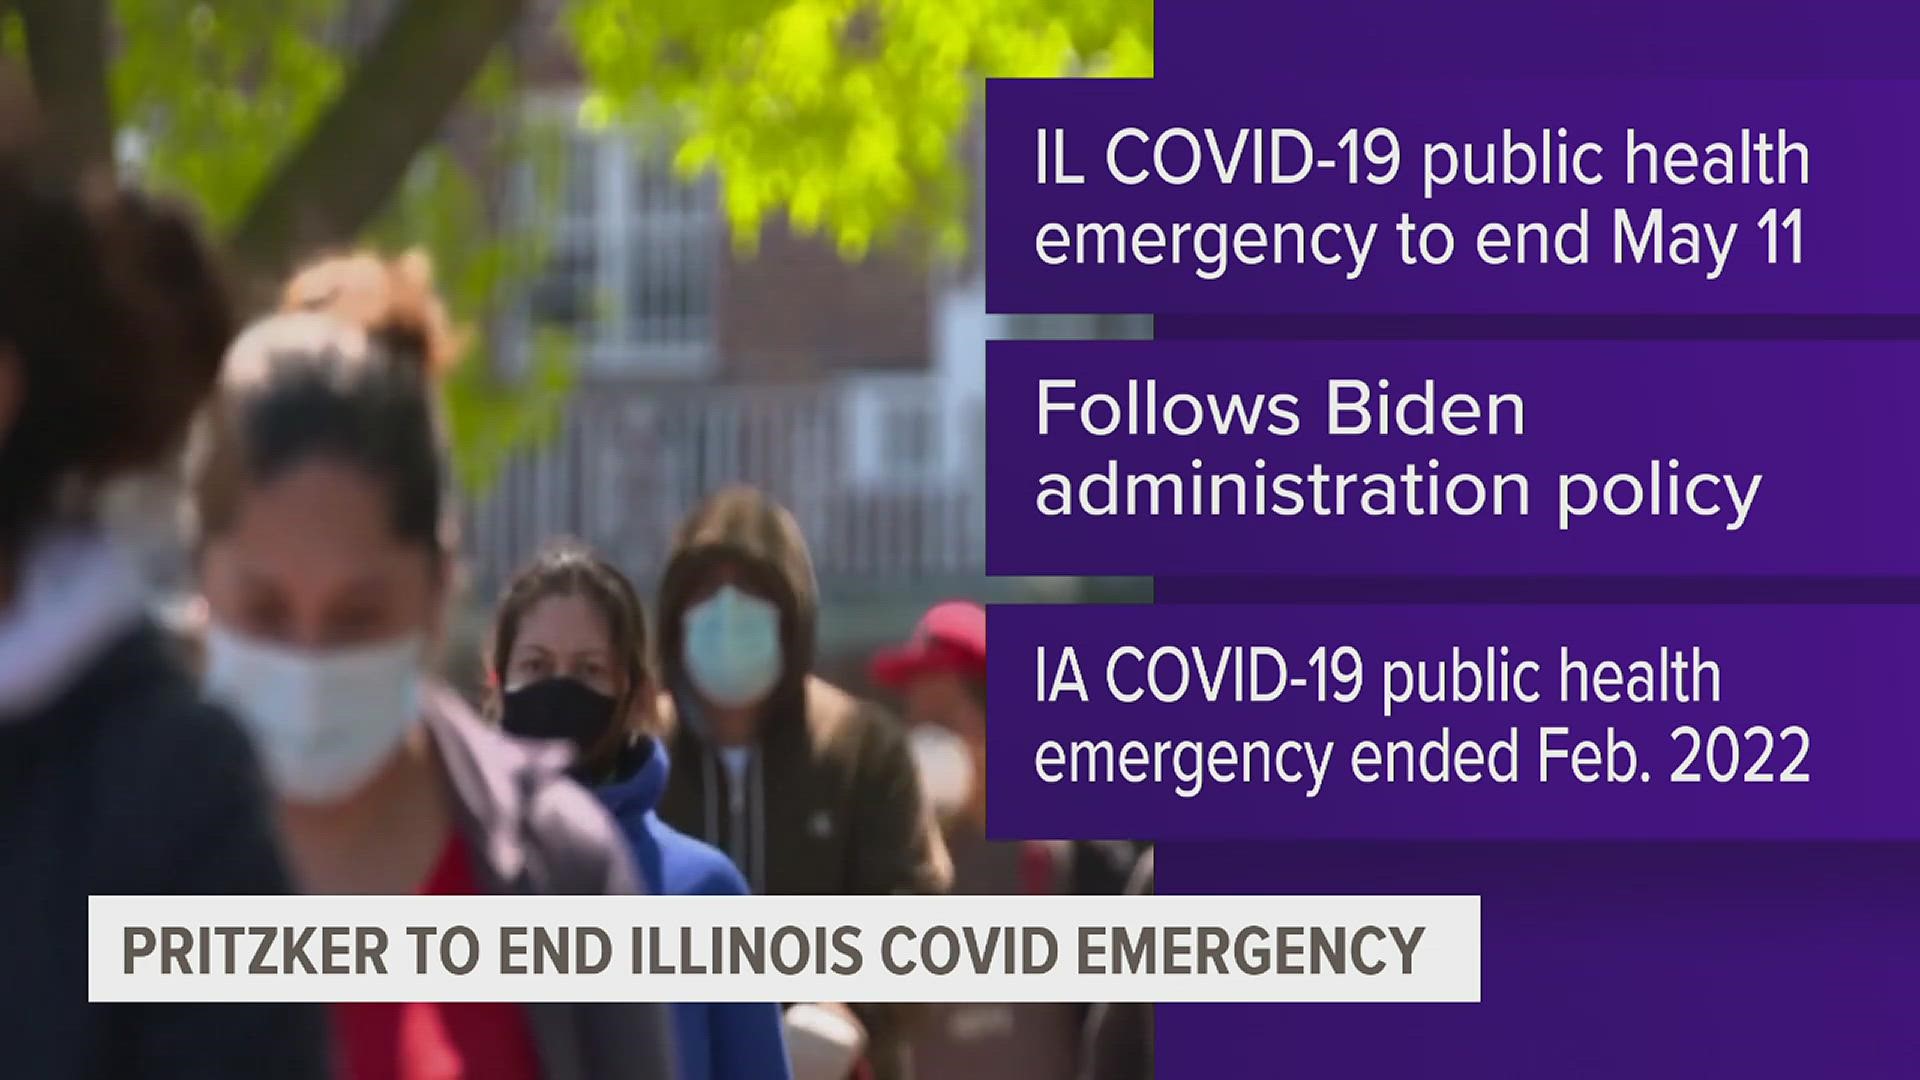 The state is aligning with President Biden's decision to end public health emergencies but still reminds the public that the COVID-19 virus is still a threat.